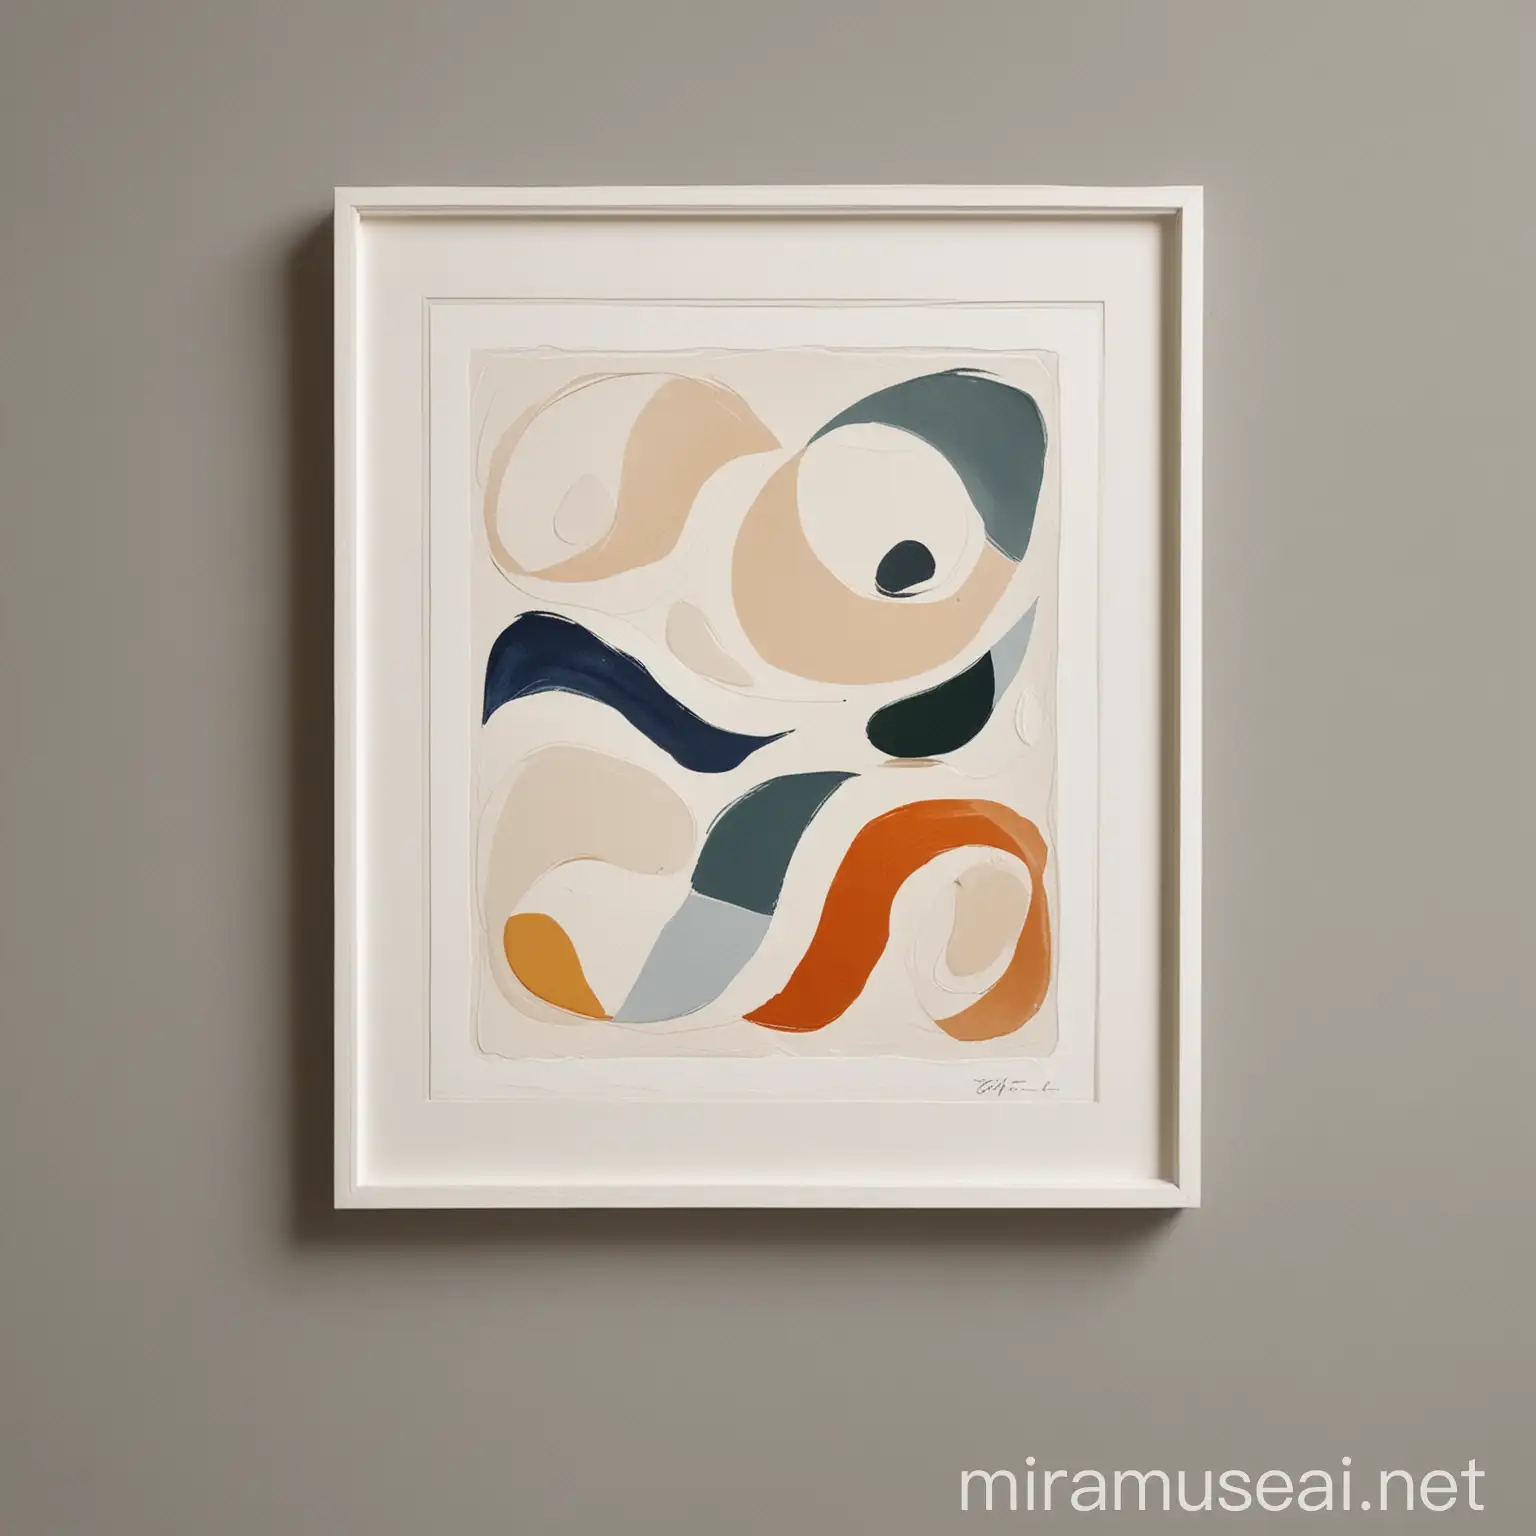 a picture of a picture of a painting with a white frame, abstract shapes, abstract forms and shapes, abstract minimalist painting, stylized layered shapes, abstract edges, minimalist abstract art, modern art style, inspired by Jean Arp, abstract holescape, simple curvilinear watercolor, graphic shapes, abstract style, abstract flat colour, canvas art print